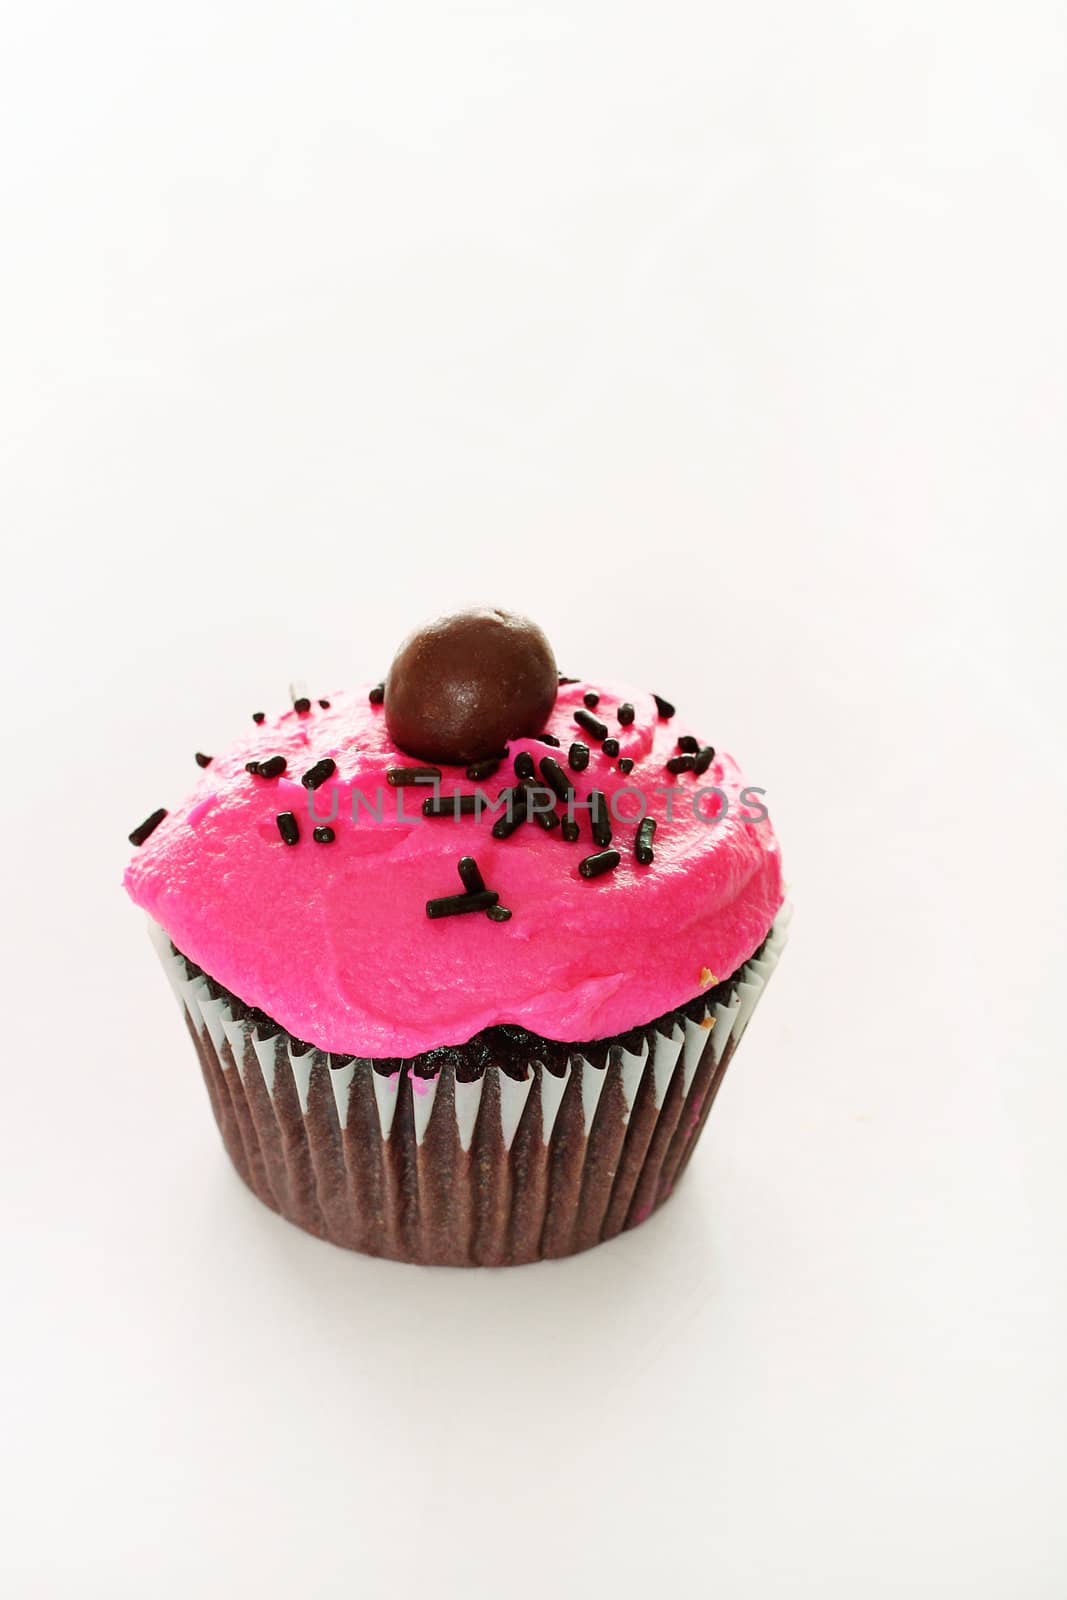 shot of a chocolate cupcake with pink frosting by creativestock